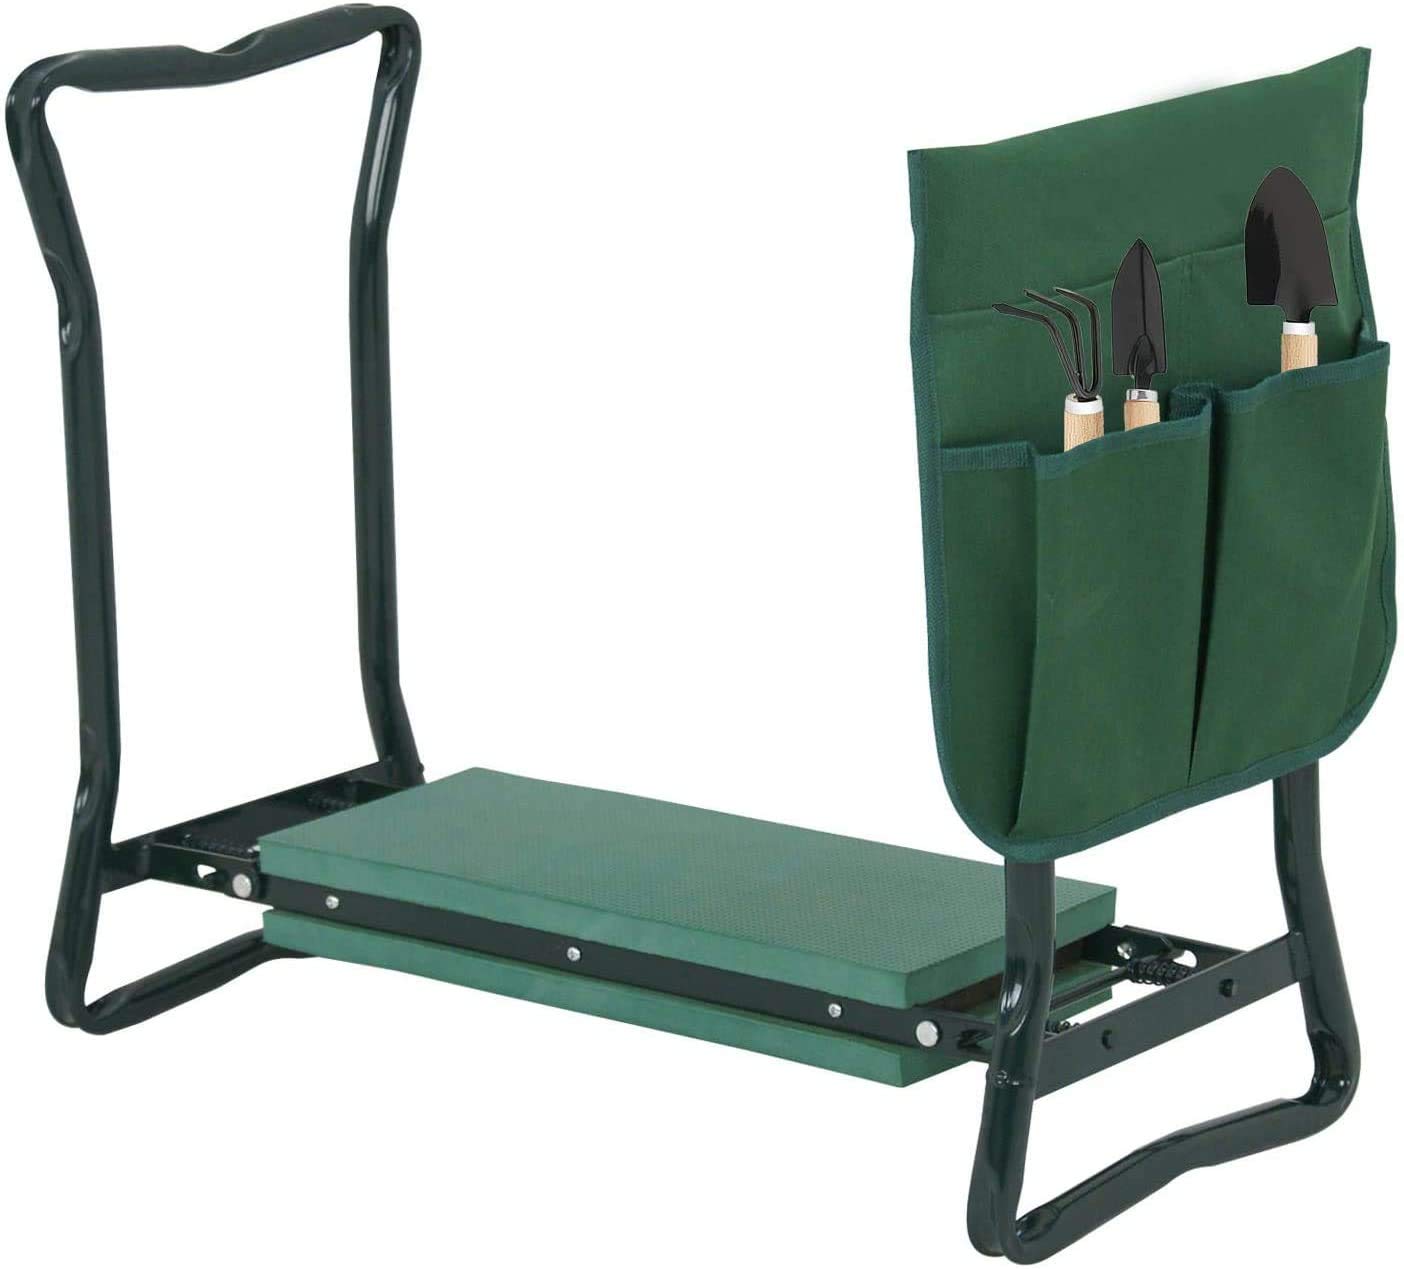 Smartxchoices Folding Garden Kneeler Seat Garden Bench Stool with Handles, Multi-use Pouch, Heavy Duty Yard Gardening Chair with Soft Kneeling Pad, Green